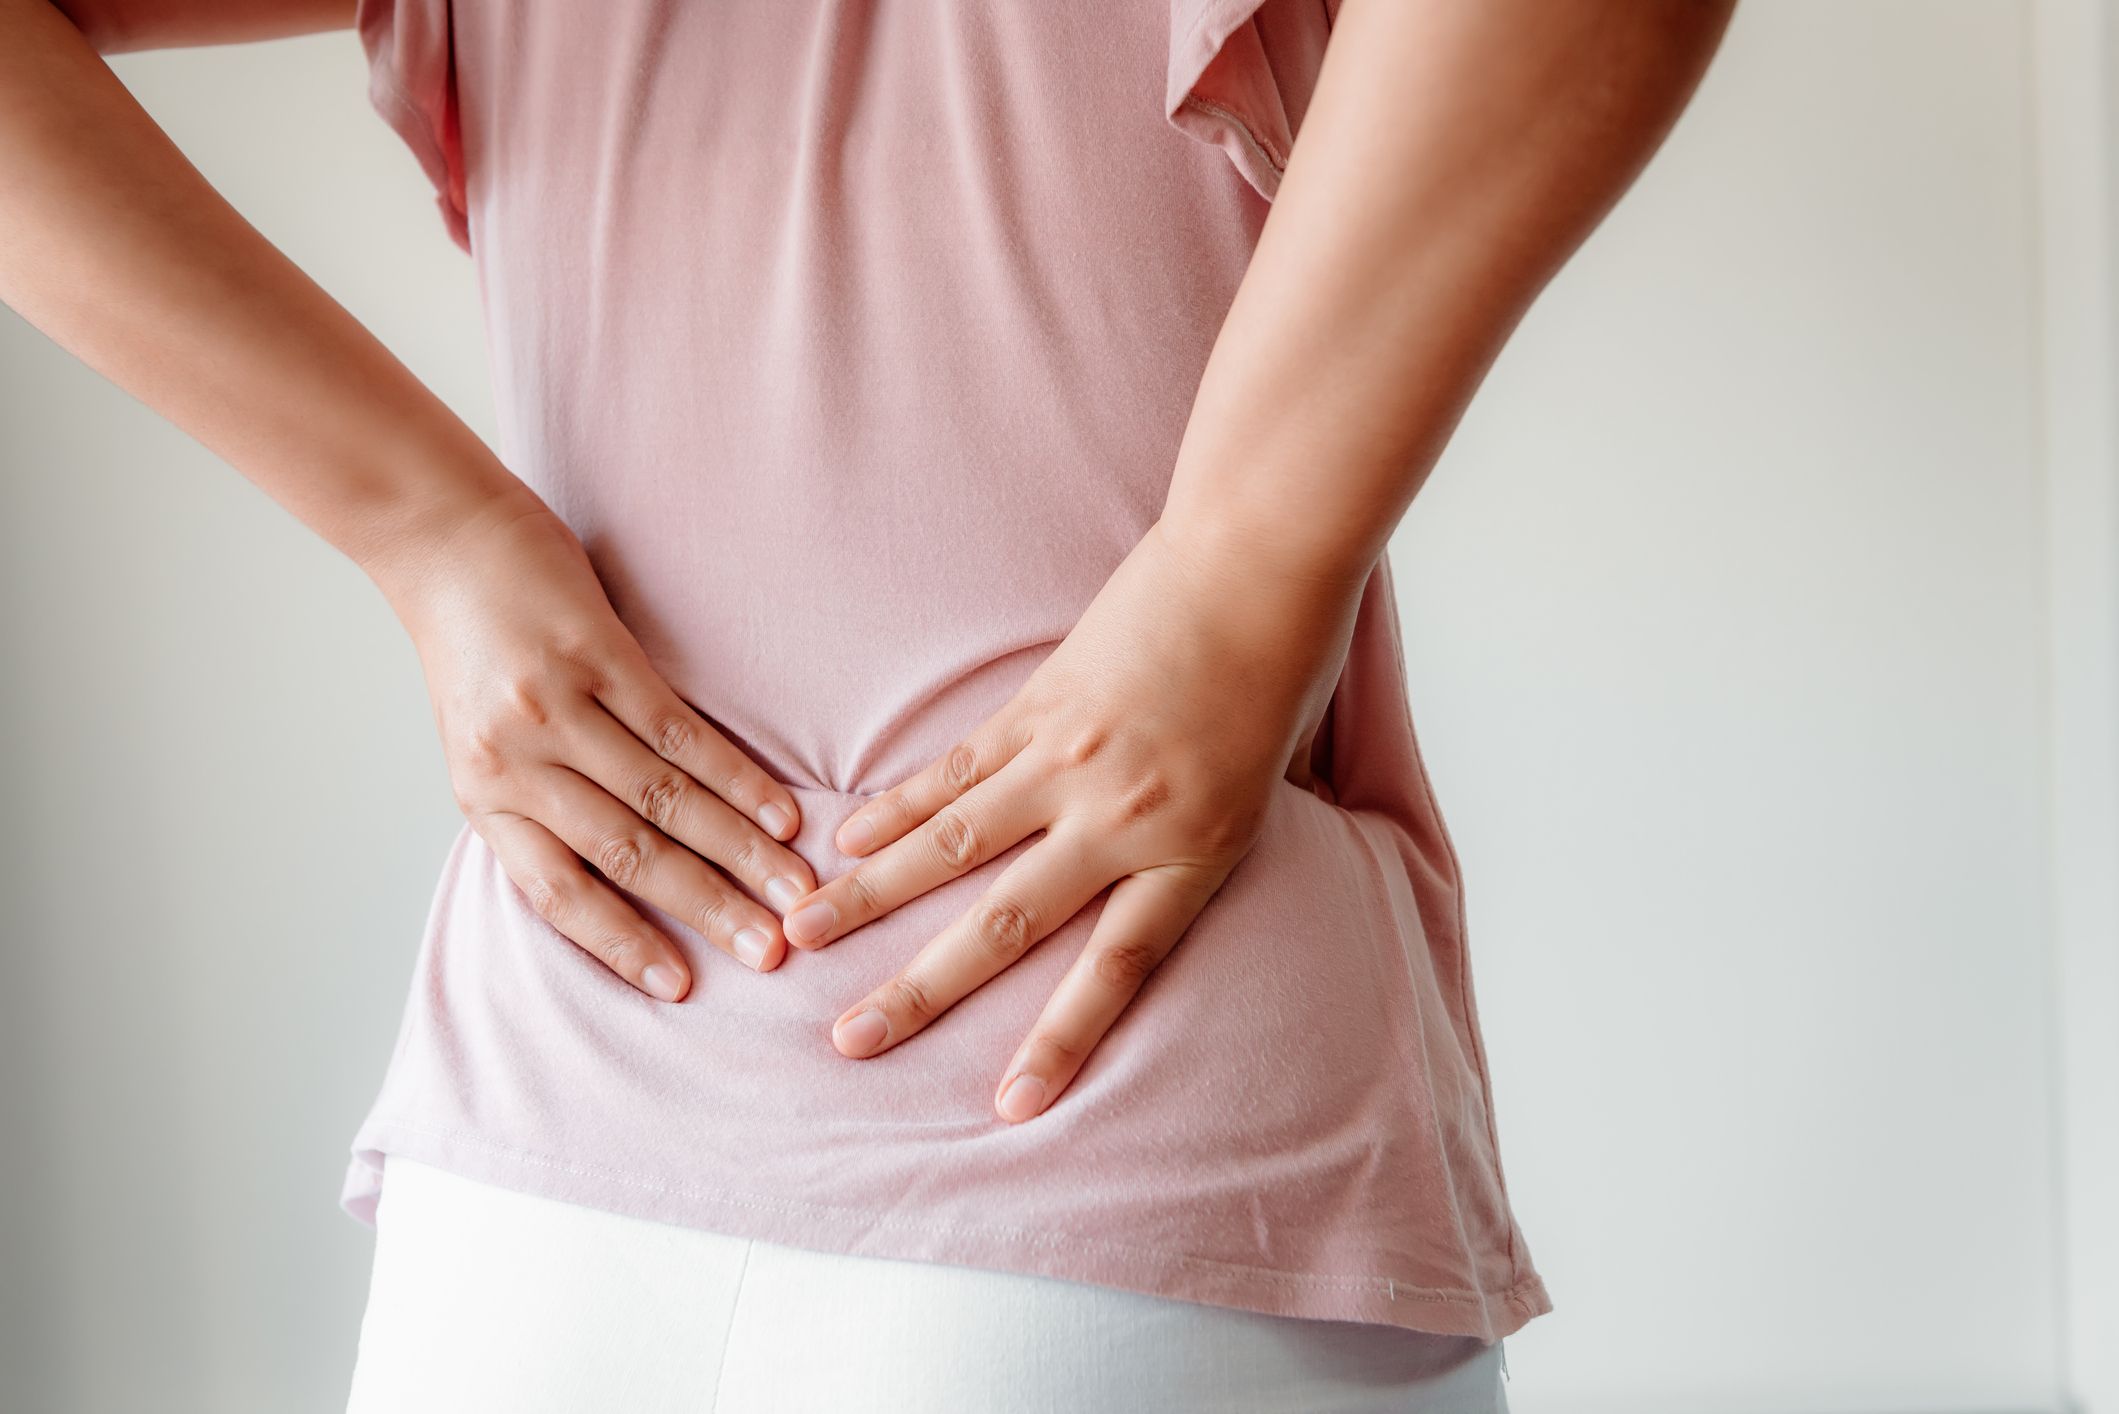 8 Causes of Lower Back Pain in Women, According to Doctors